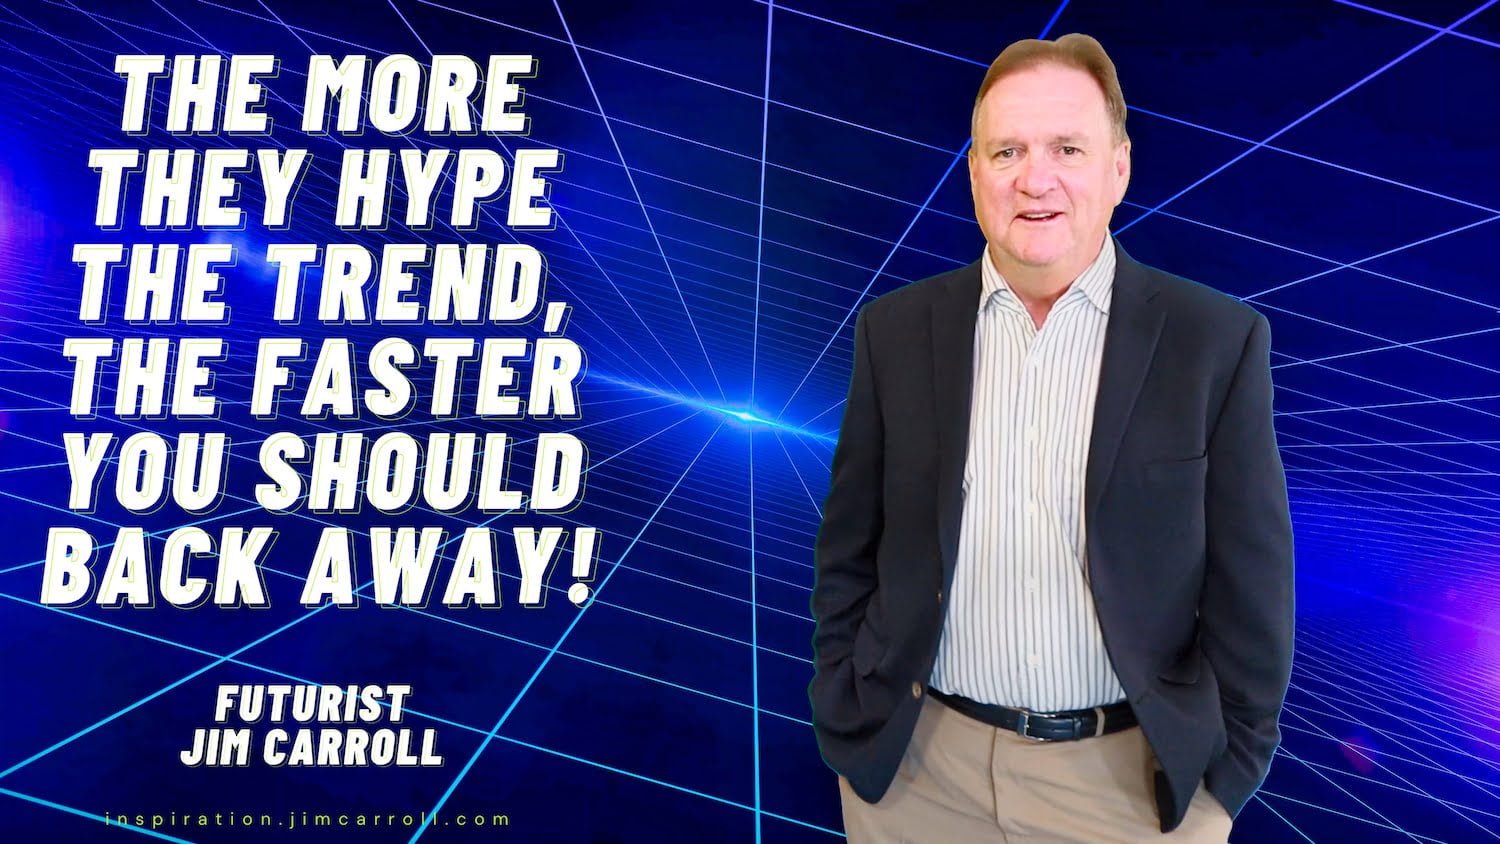 Daily Inspiration: "The more they hype the trend the faster you should back away!"